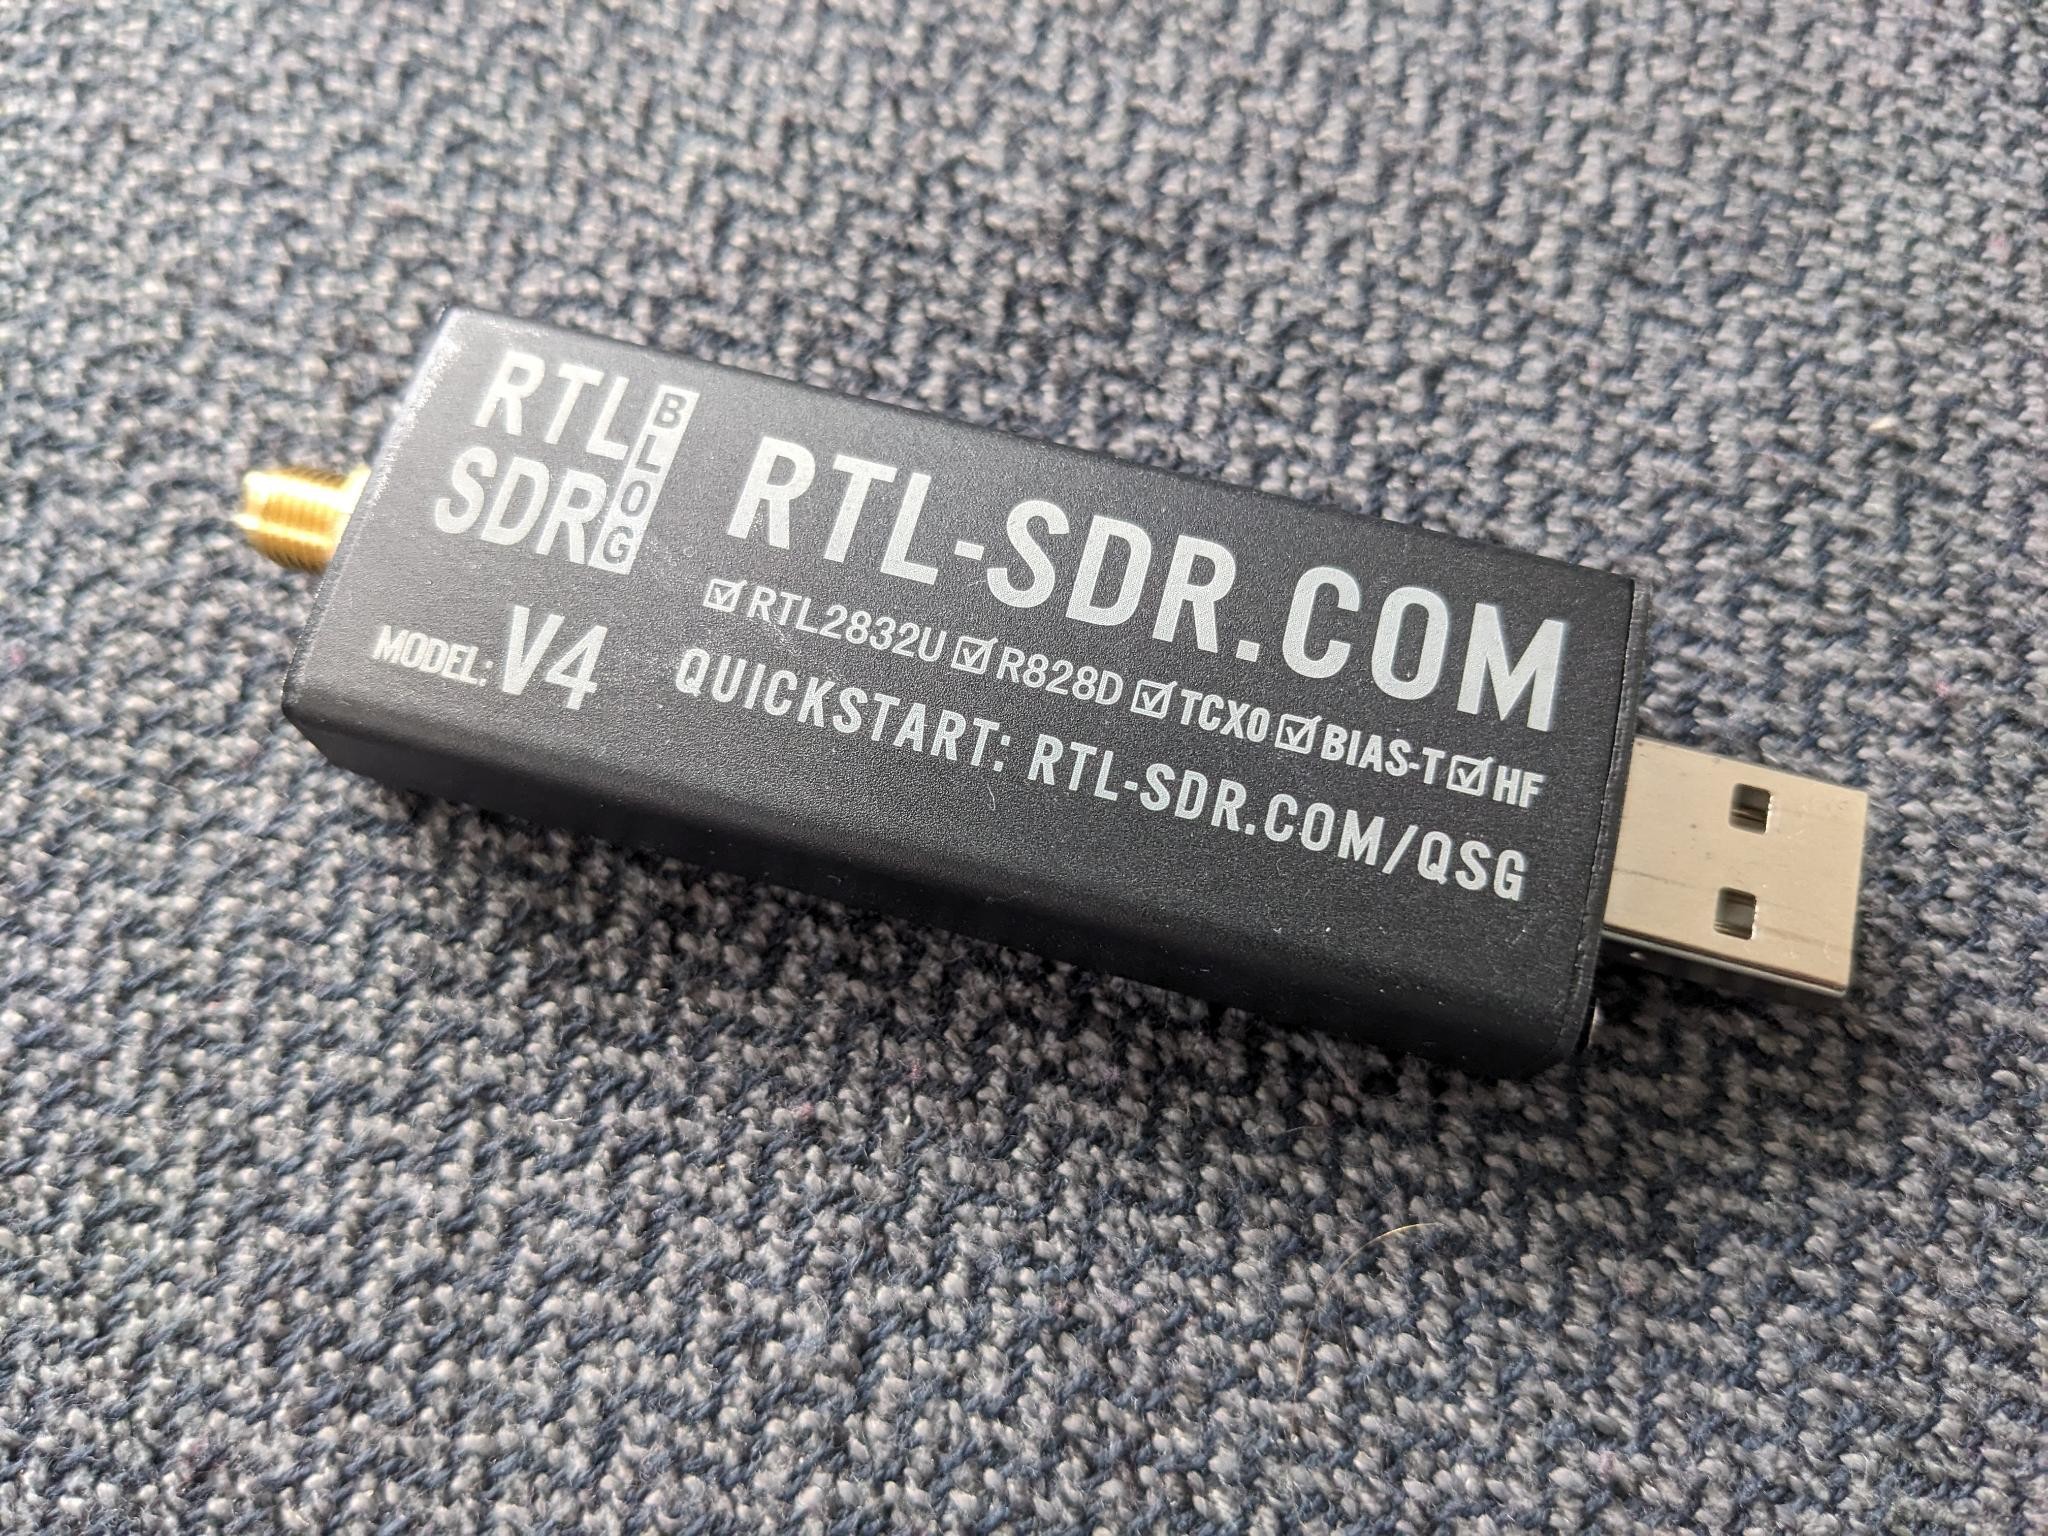 The device looks like a big USB stick with a bronze screw connector at the back end. It's labelled "RTL-SDR Blog V4".